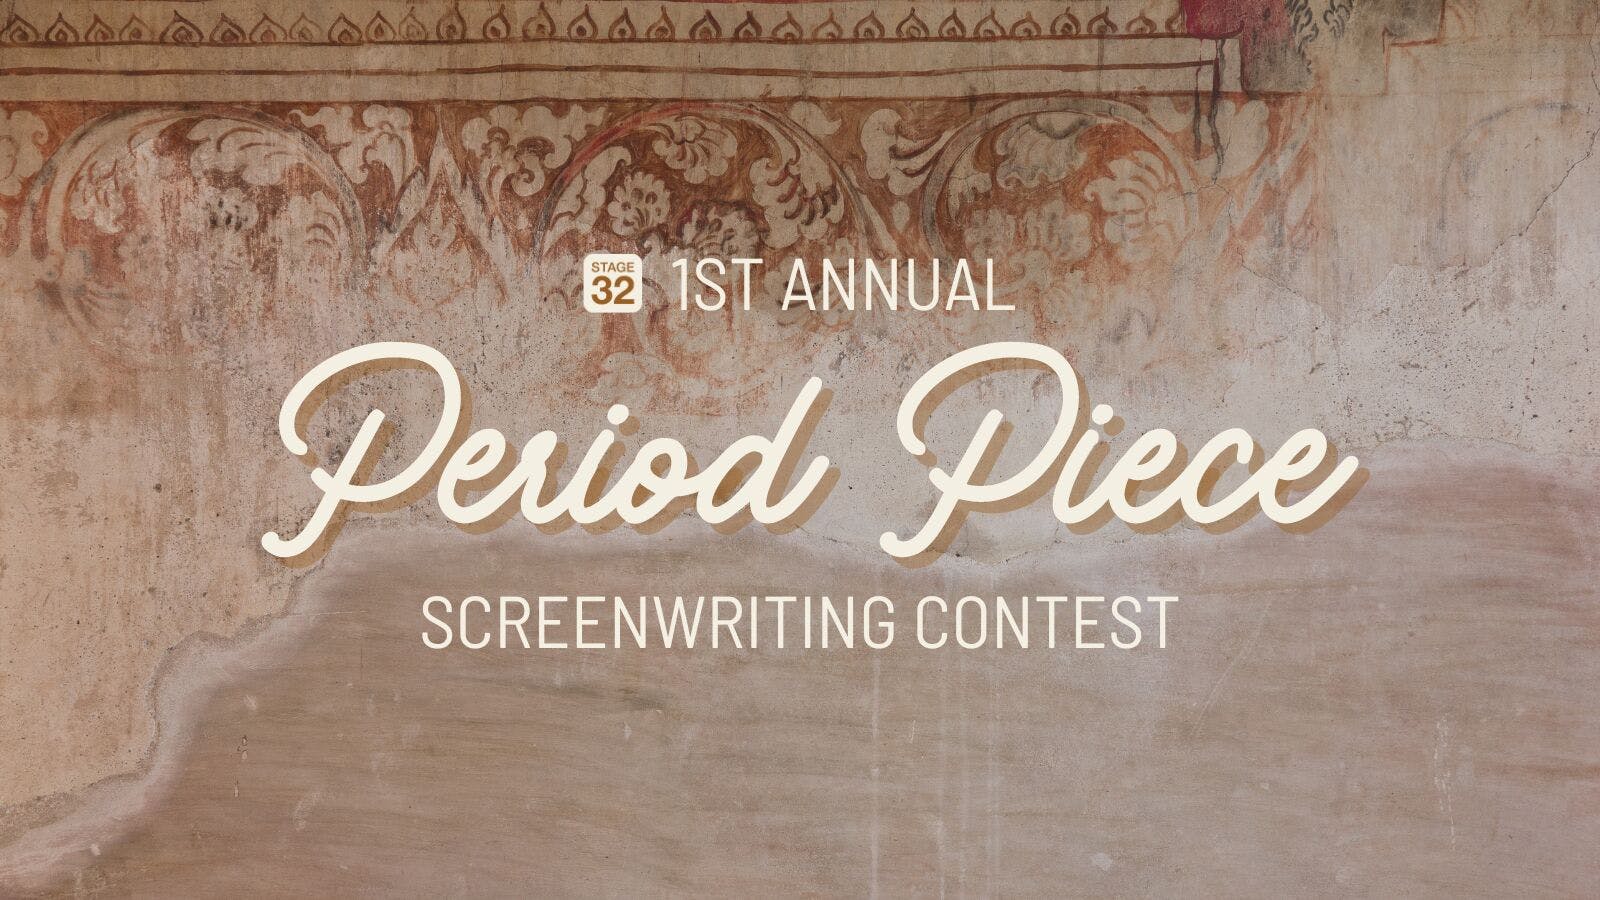 Announcing the 1st Annual Period Piece Screenwriting Contest